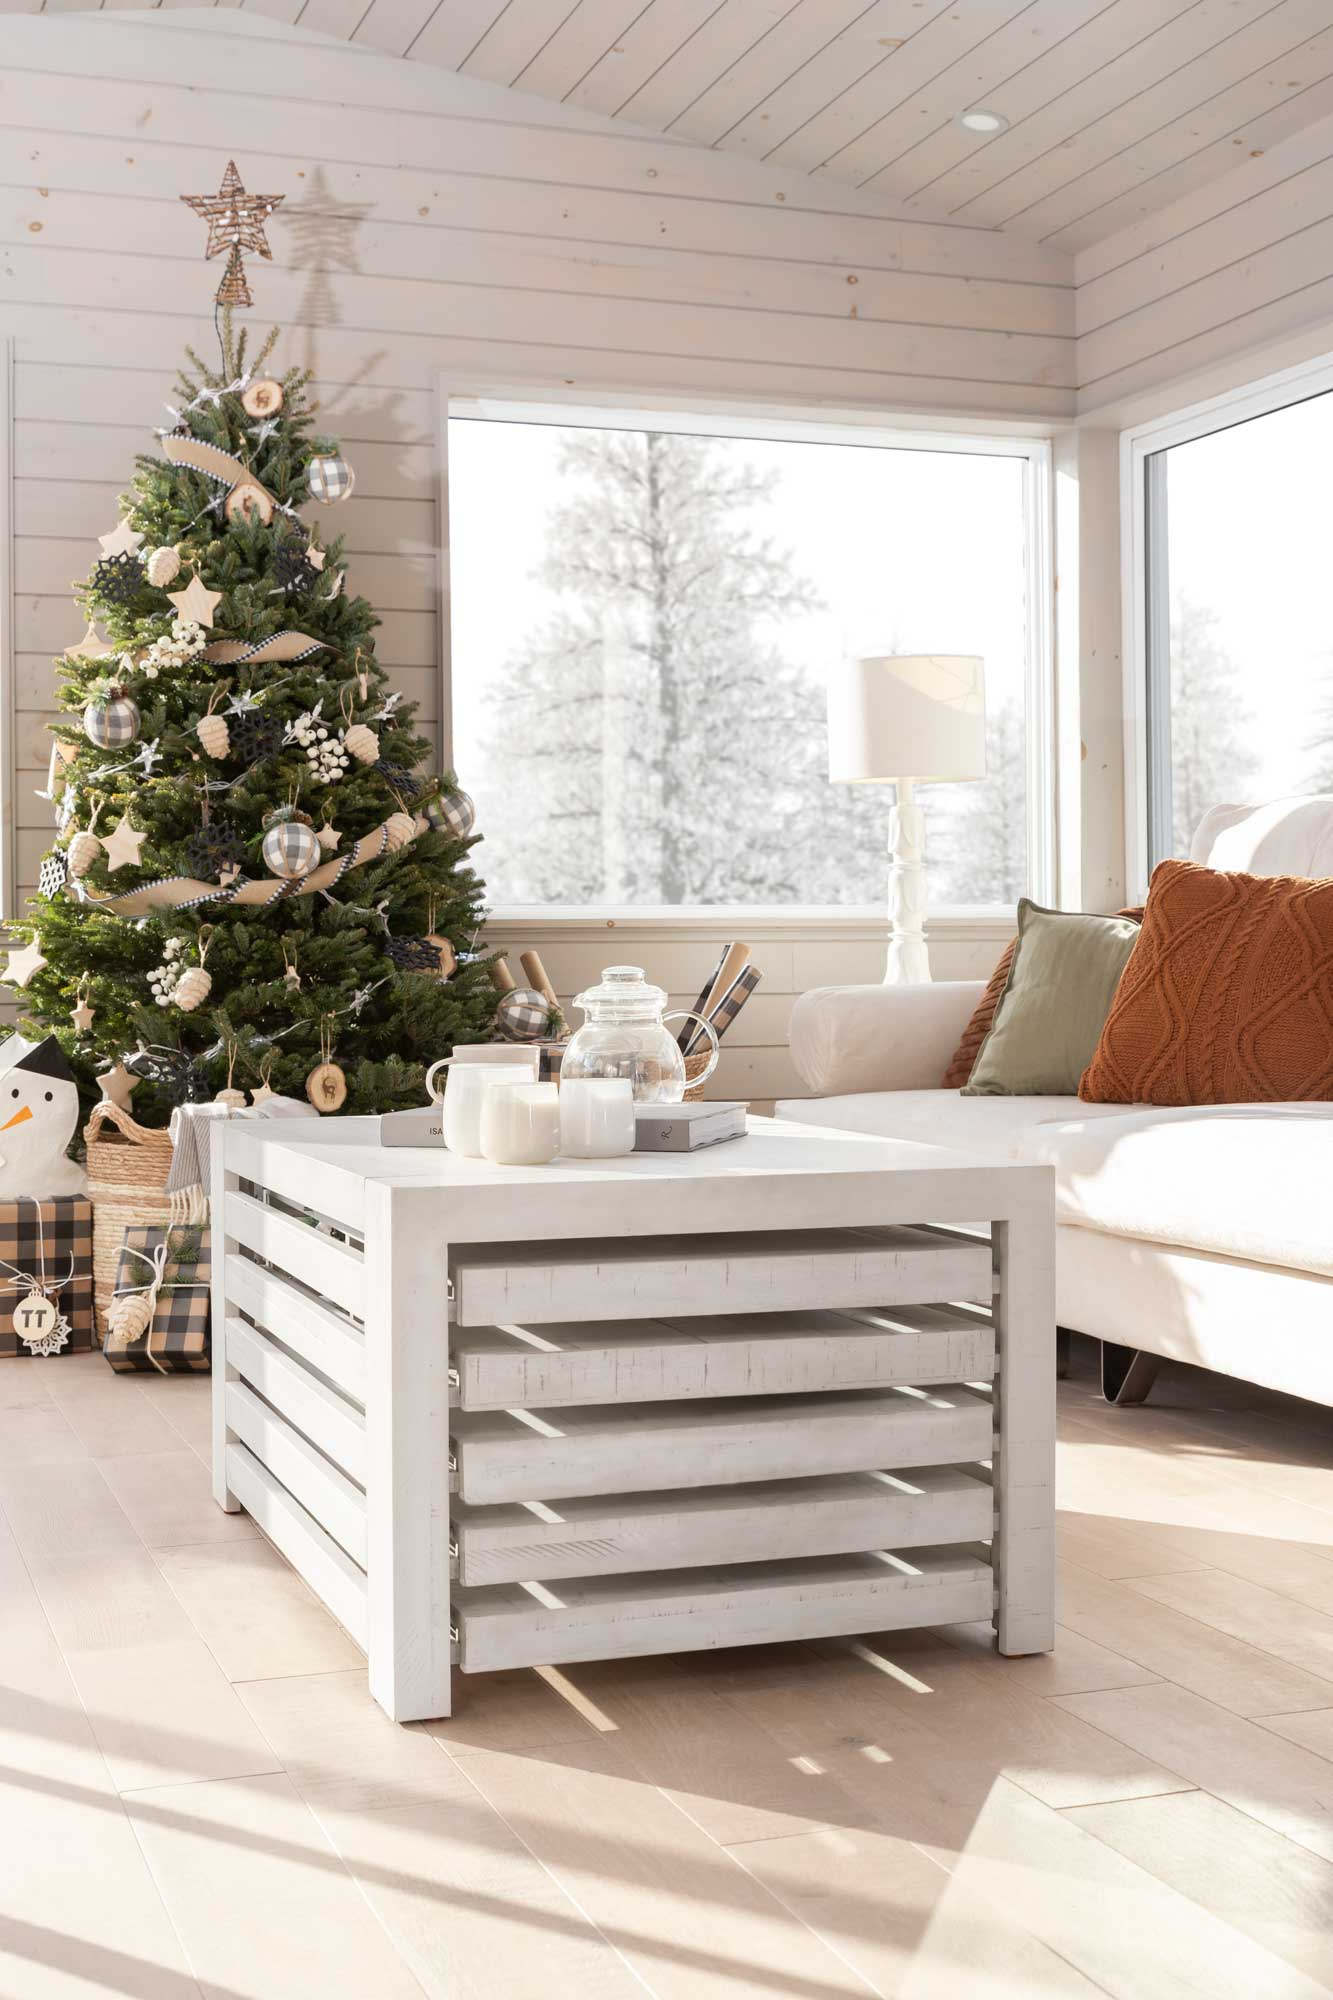 A Christmas tree in a living room with a coffee table